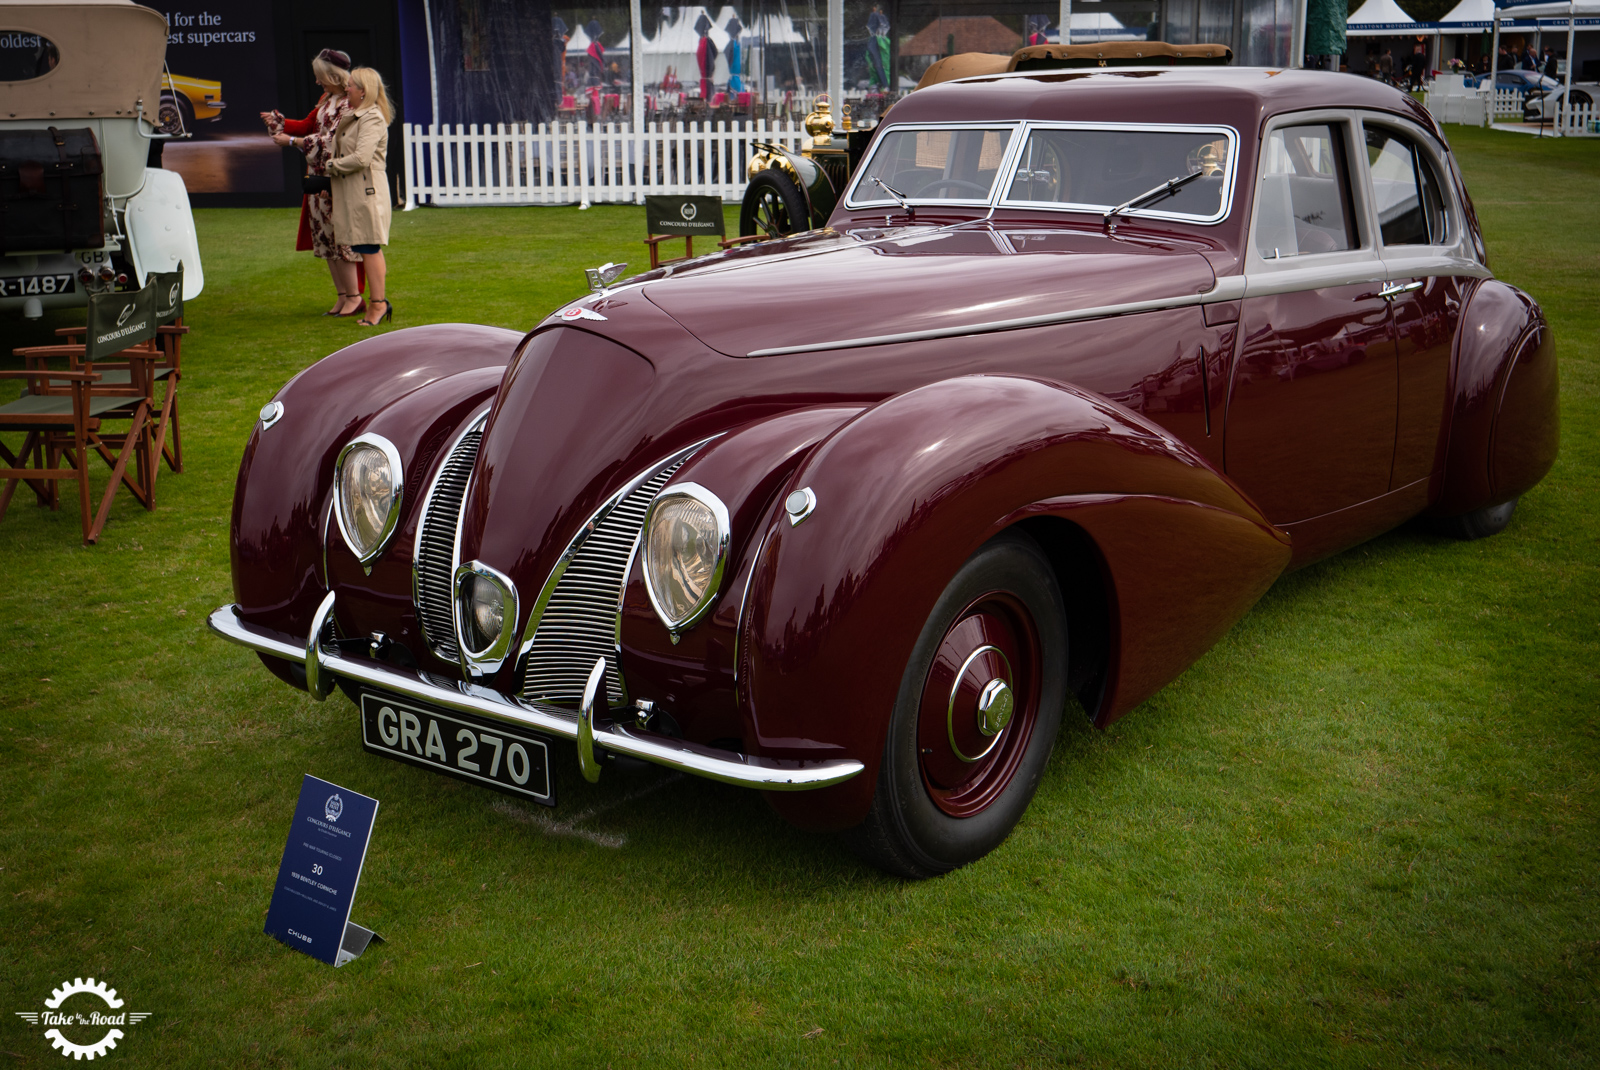 Highlights from Salon Prive Concours D'Elegance 2019